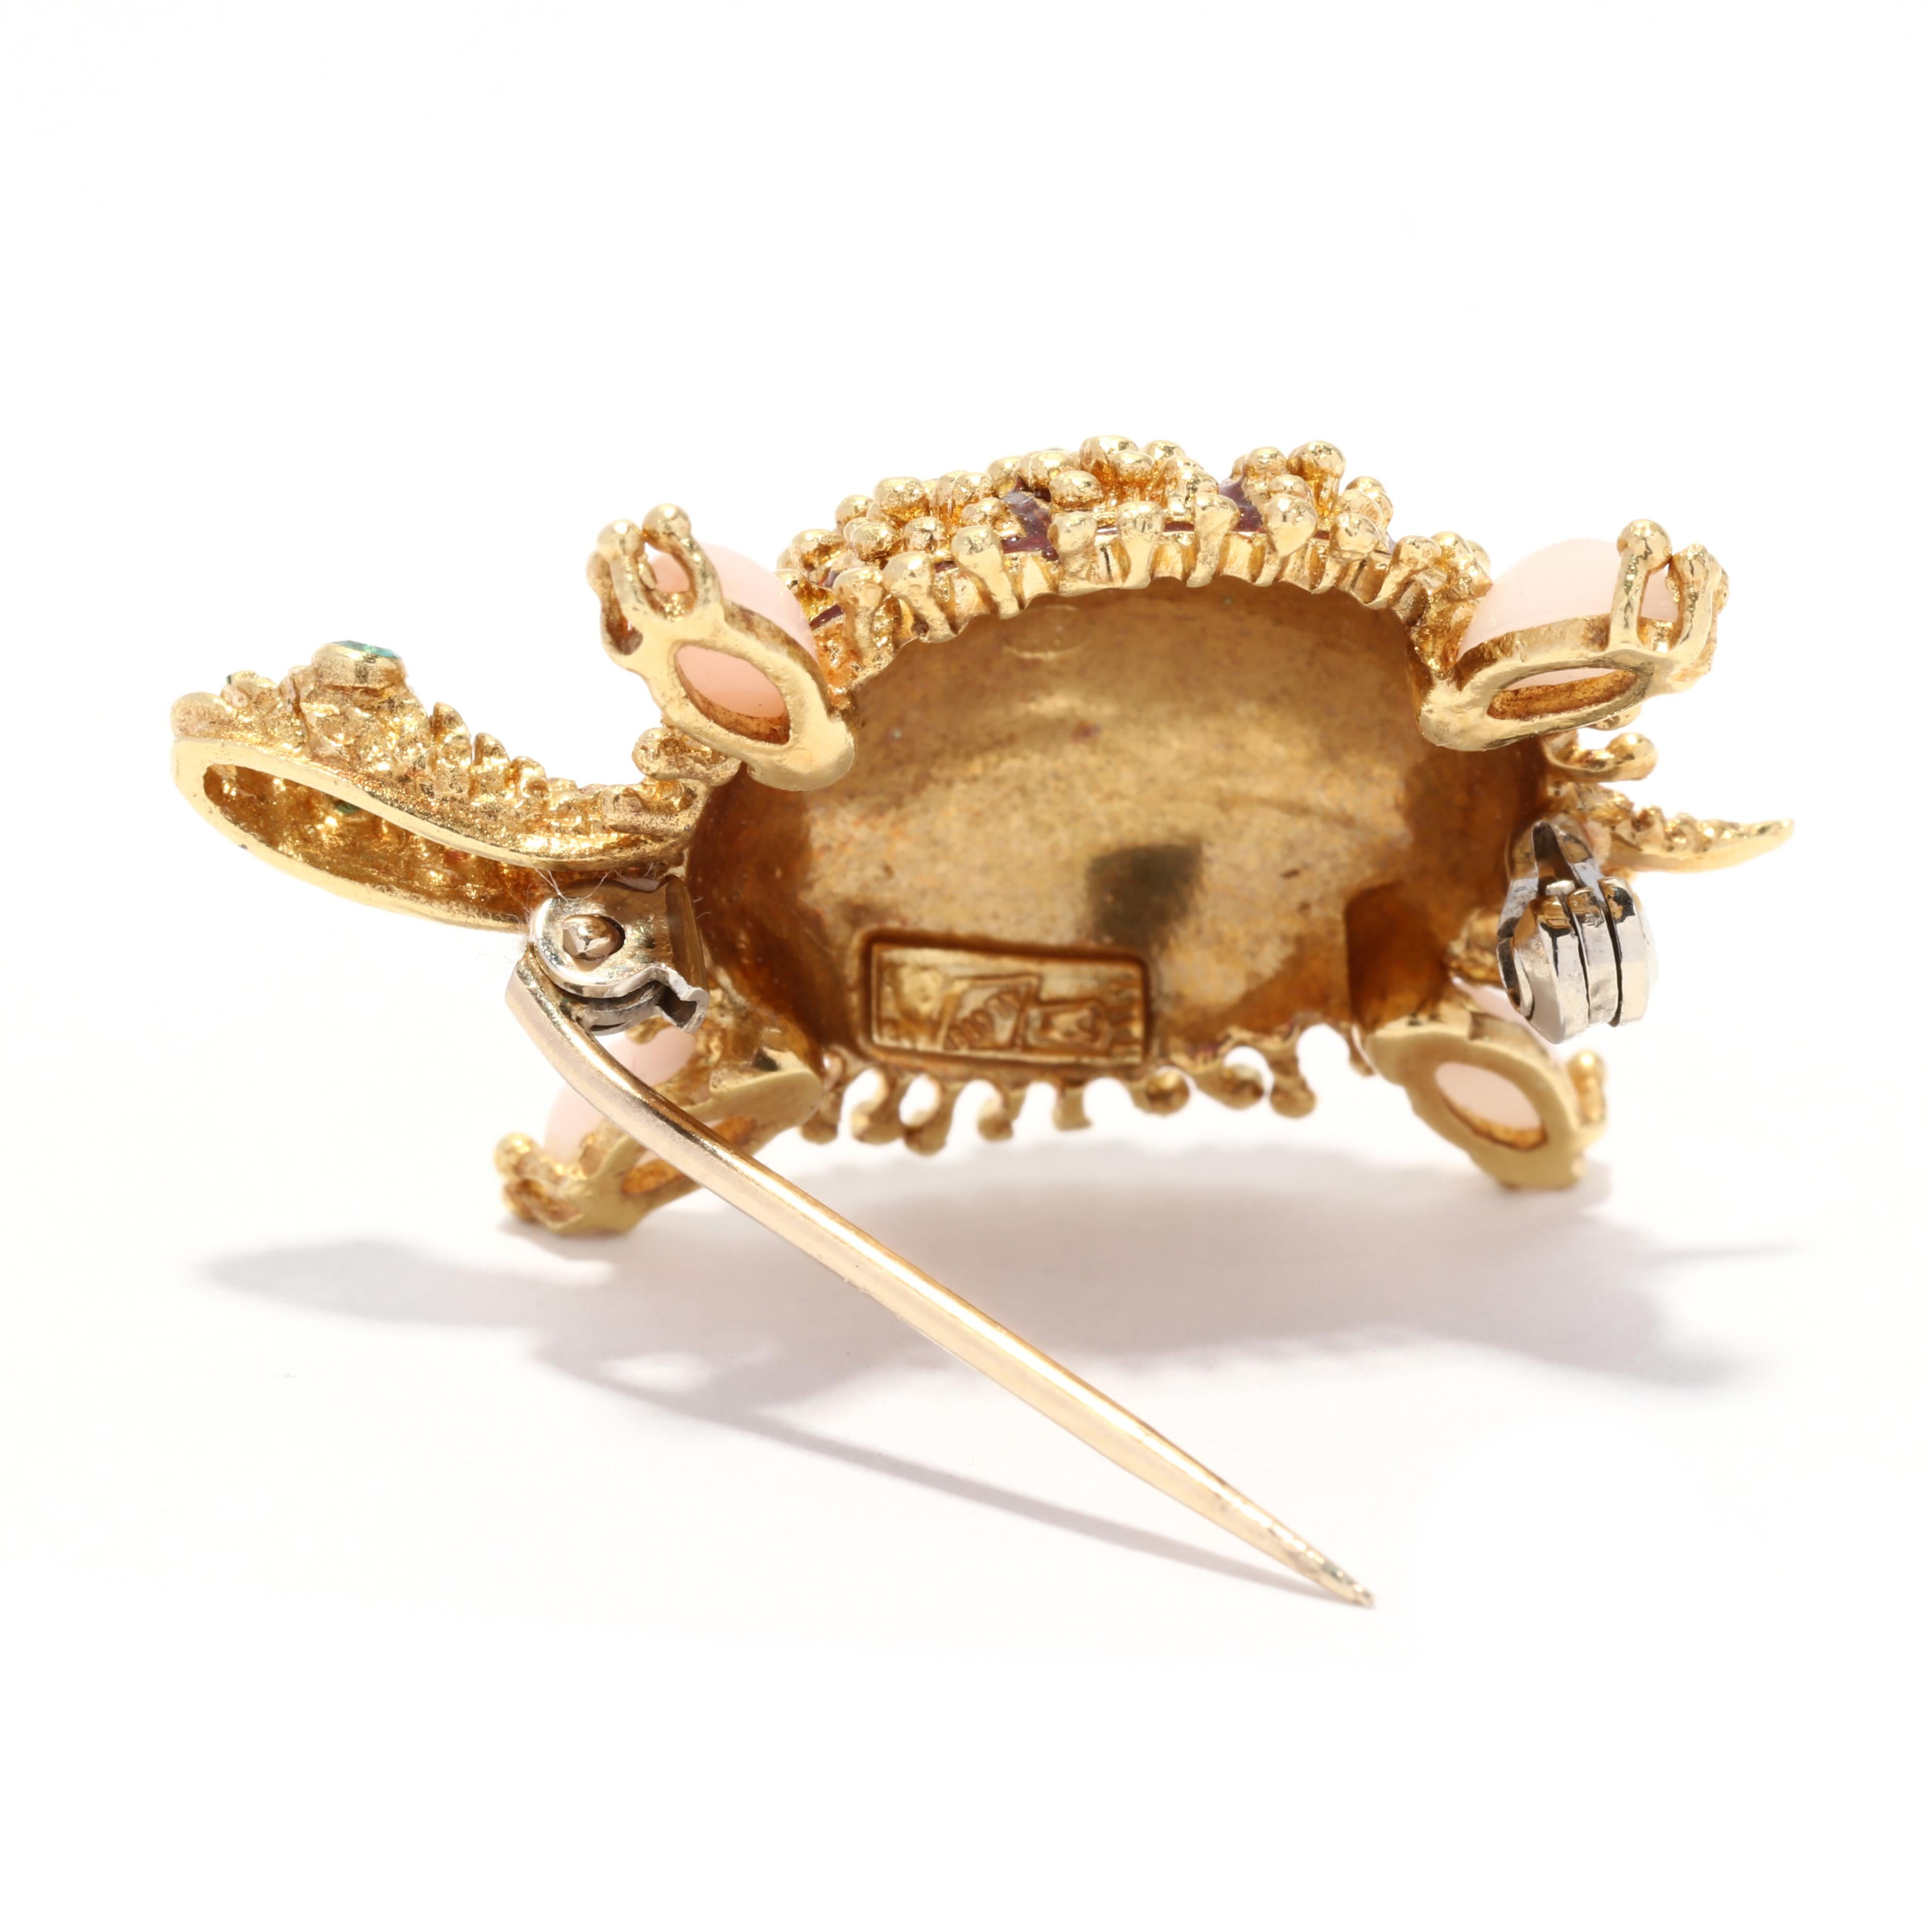 A vintage 14 karat yellow gold Italian coral enamel turtle brooch. This small gold brooch features a turtle motif with a stippled exterior, red enamel detailing, marquise cabochon cut coral feet, and a pin stem clasp.

Stones:
- coral, 4 stones
-